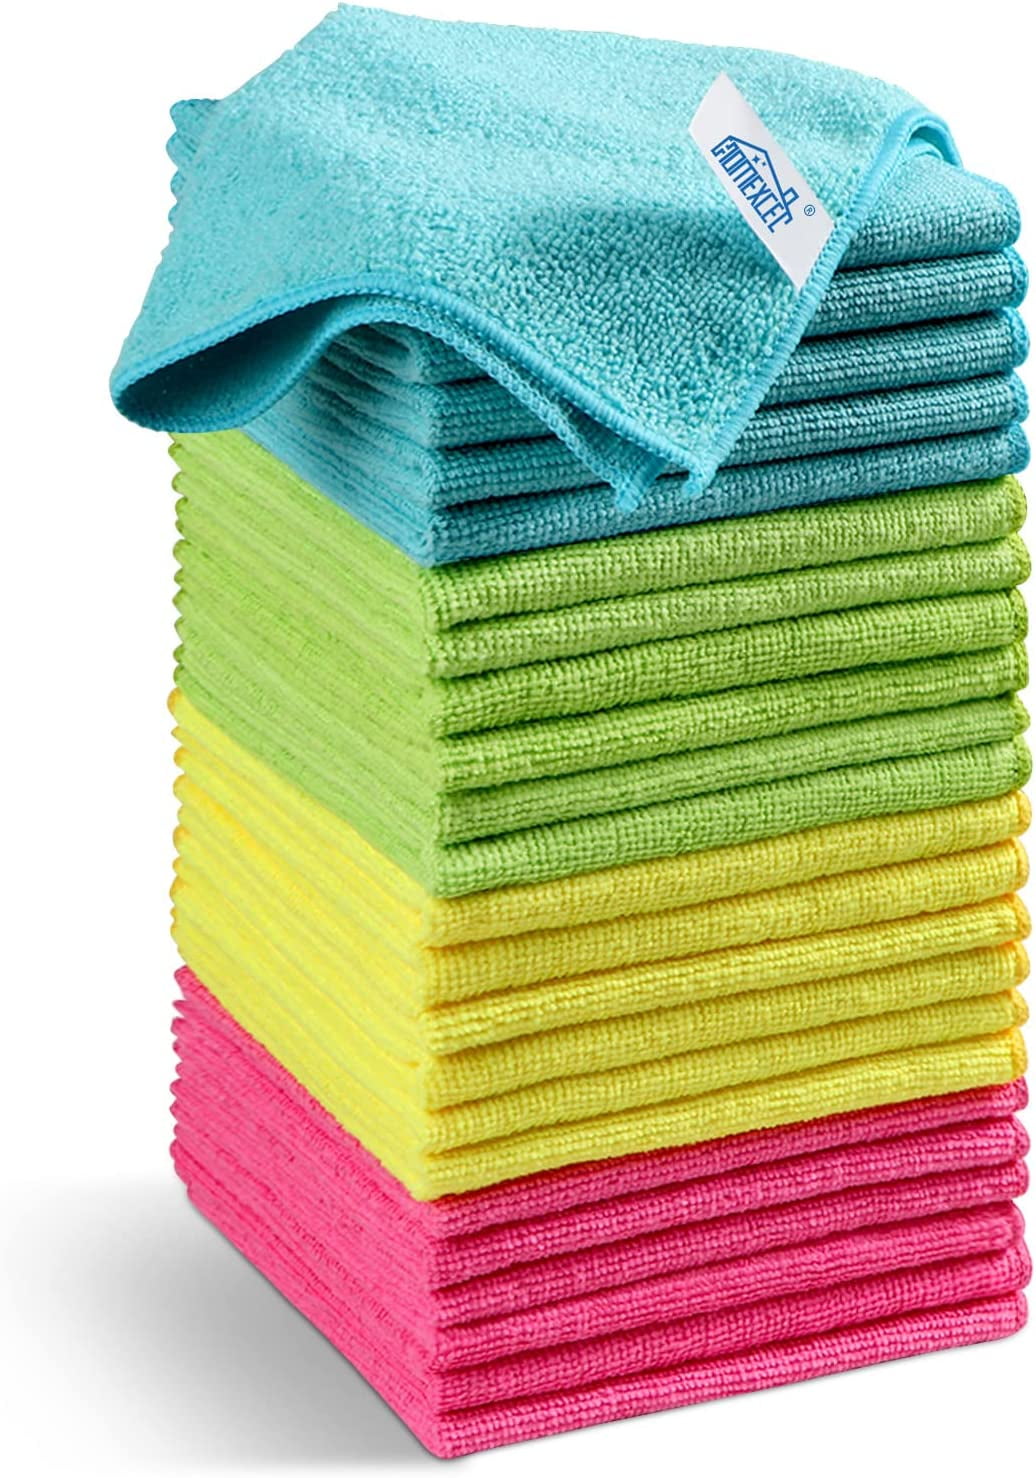 HOMEXCEL Microfiber Cleaning Cloth,12 Pack Cleaning Rag,Cleaning Towels  with 4 Color Assorted,11.5X11.5(Green/Blue/Yellow/Pink)